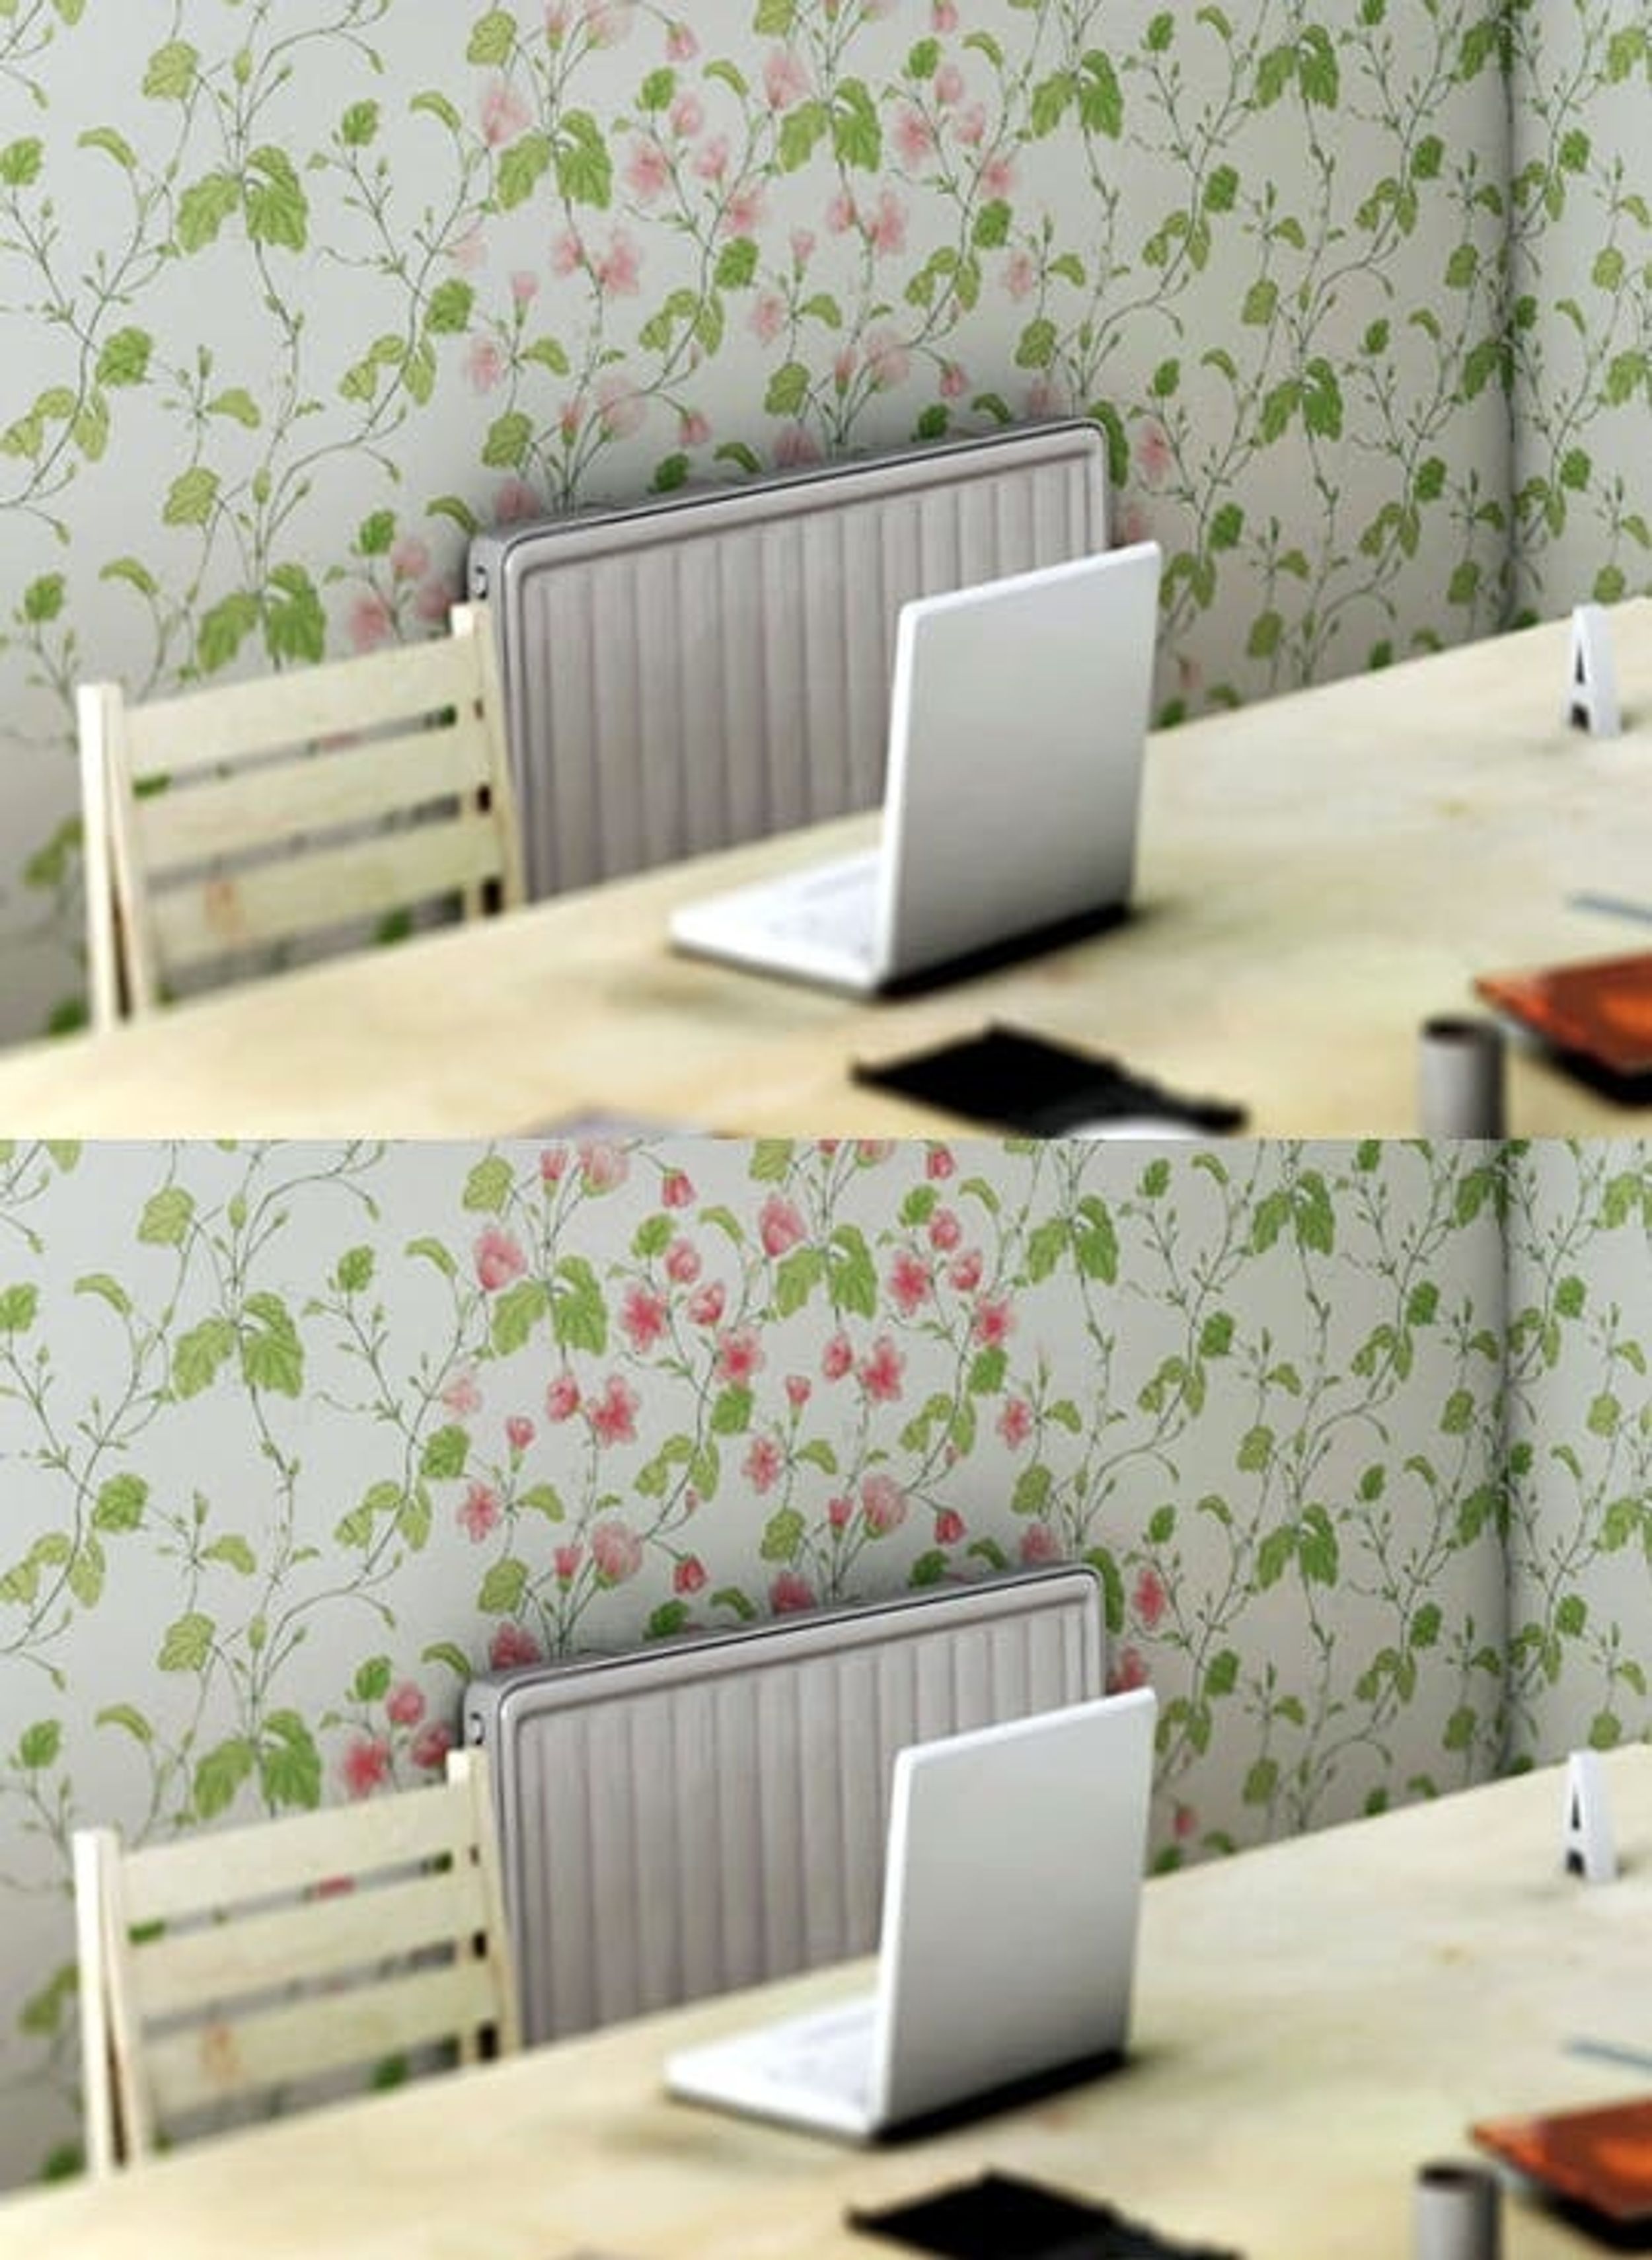 Heat-Reactive & Digital Wallpaper Let You Redecorate On The Fly